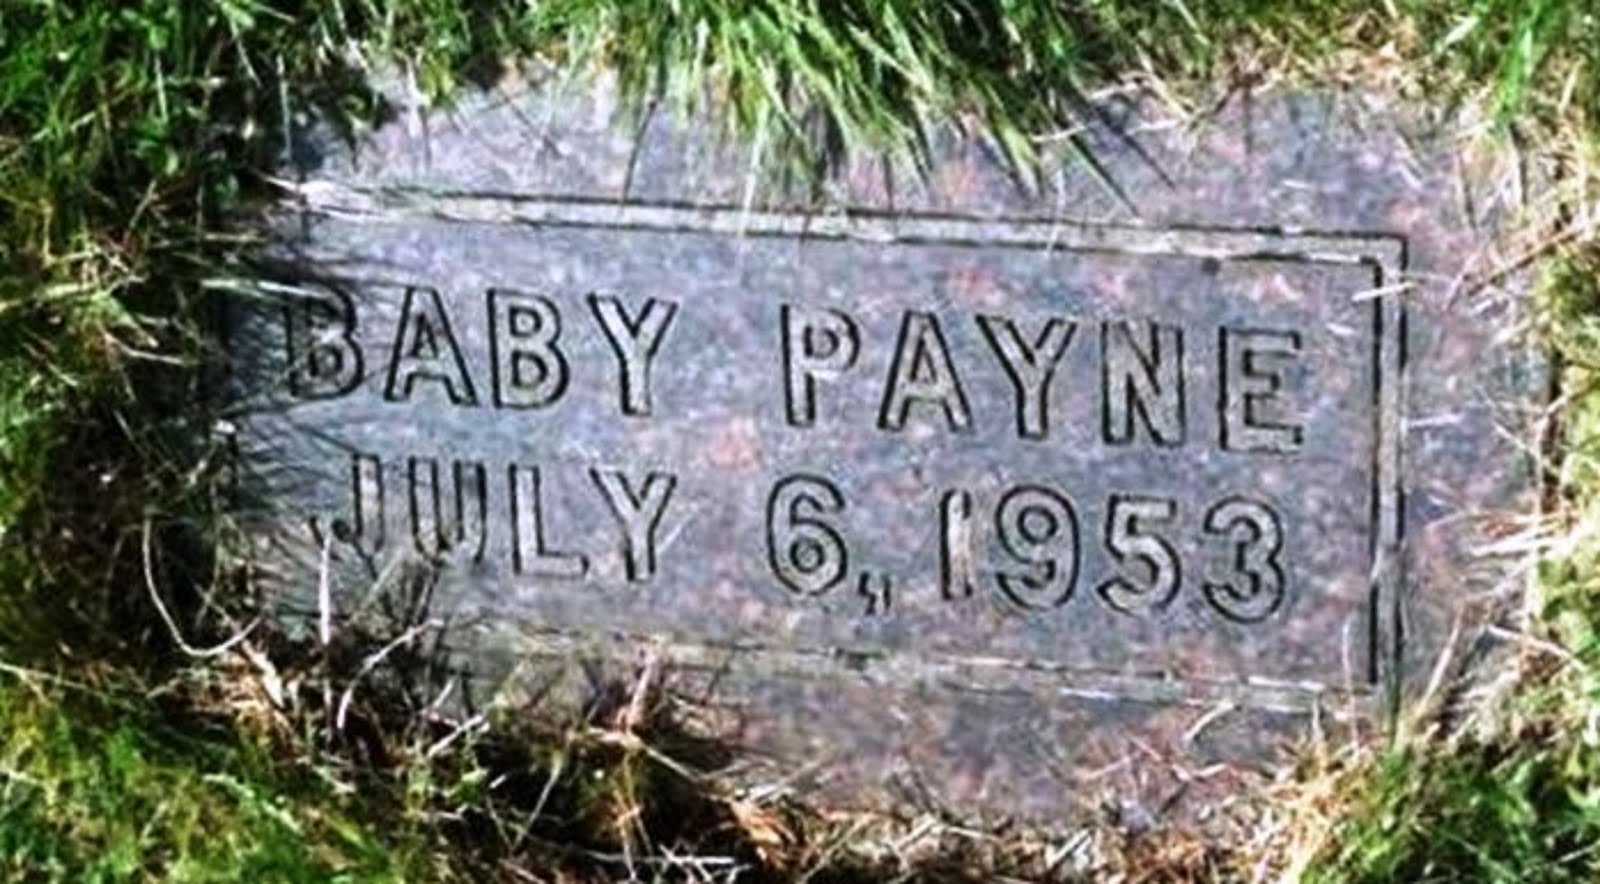 MY INFANT BABY SISTER - BORN JUNE 6th AND DIED JULY 6th - WAS MURDERED BY LPN ELSIE  PAYNE